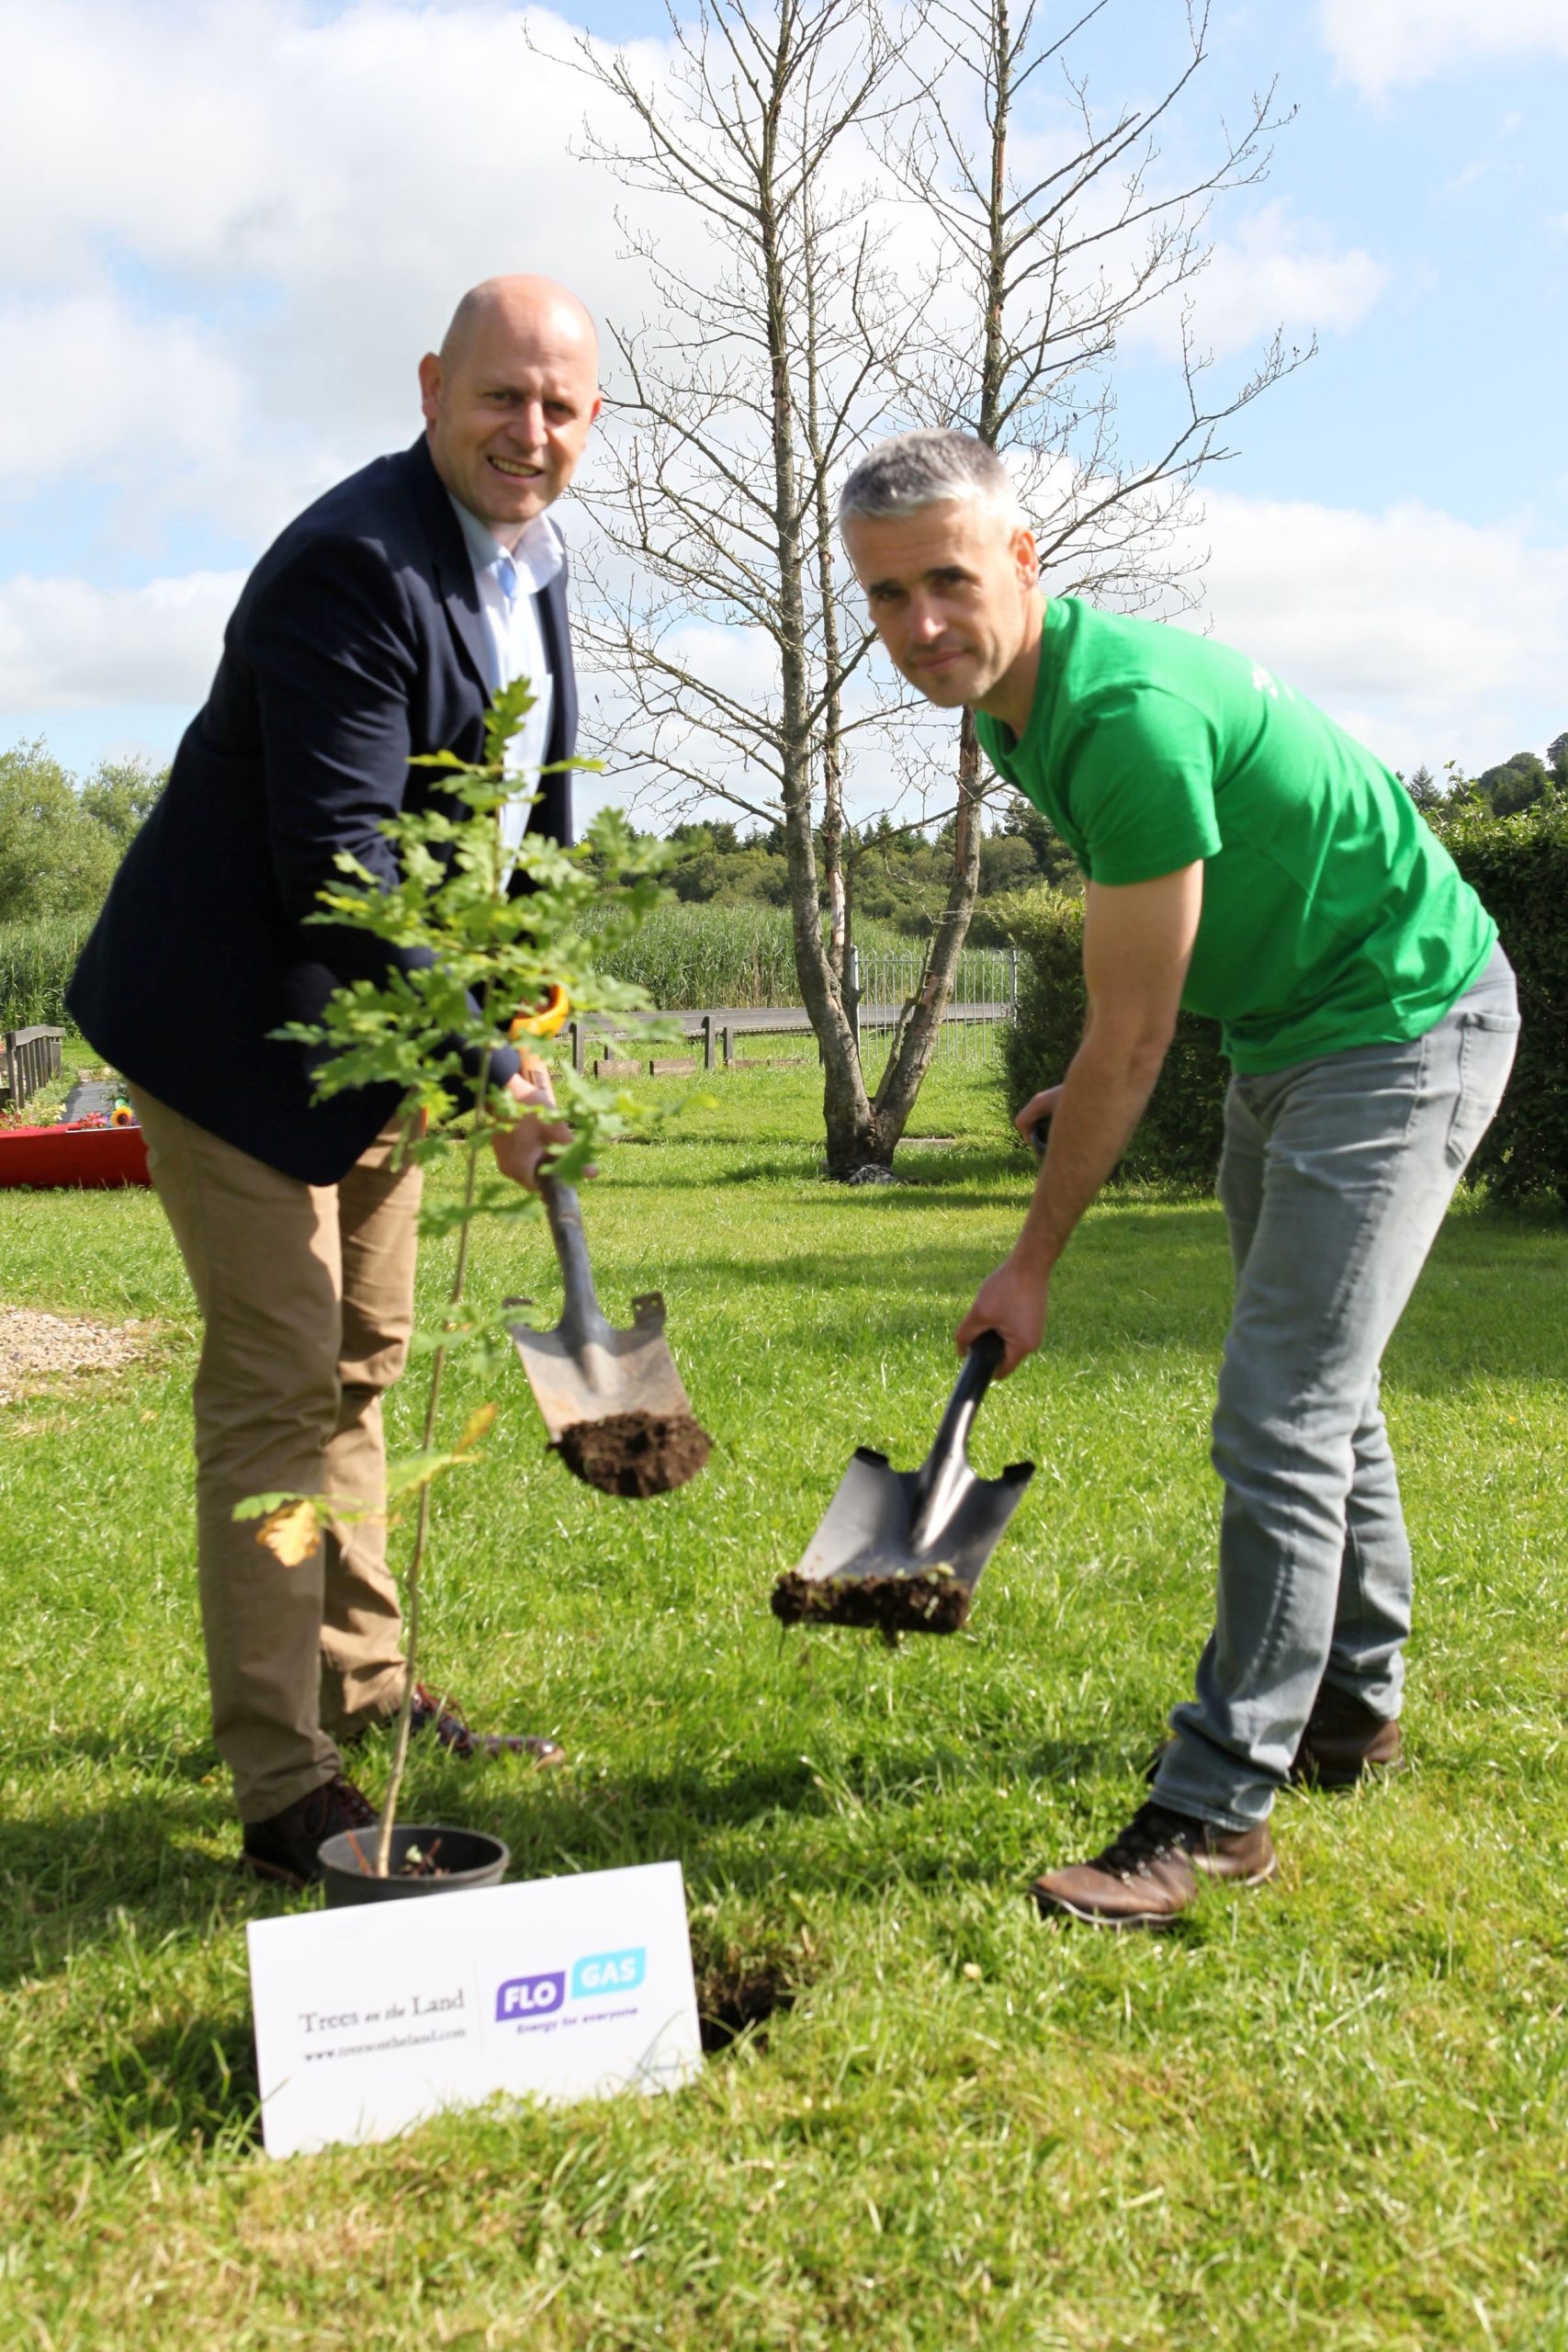 Flogas sponsors the planting of 22,000 trees across Ireland